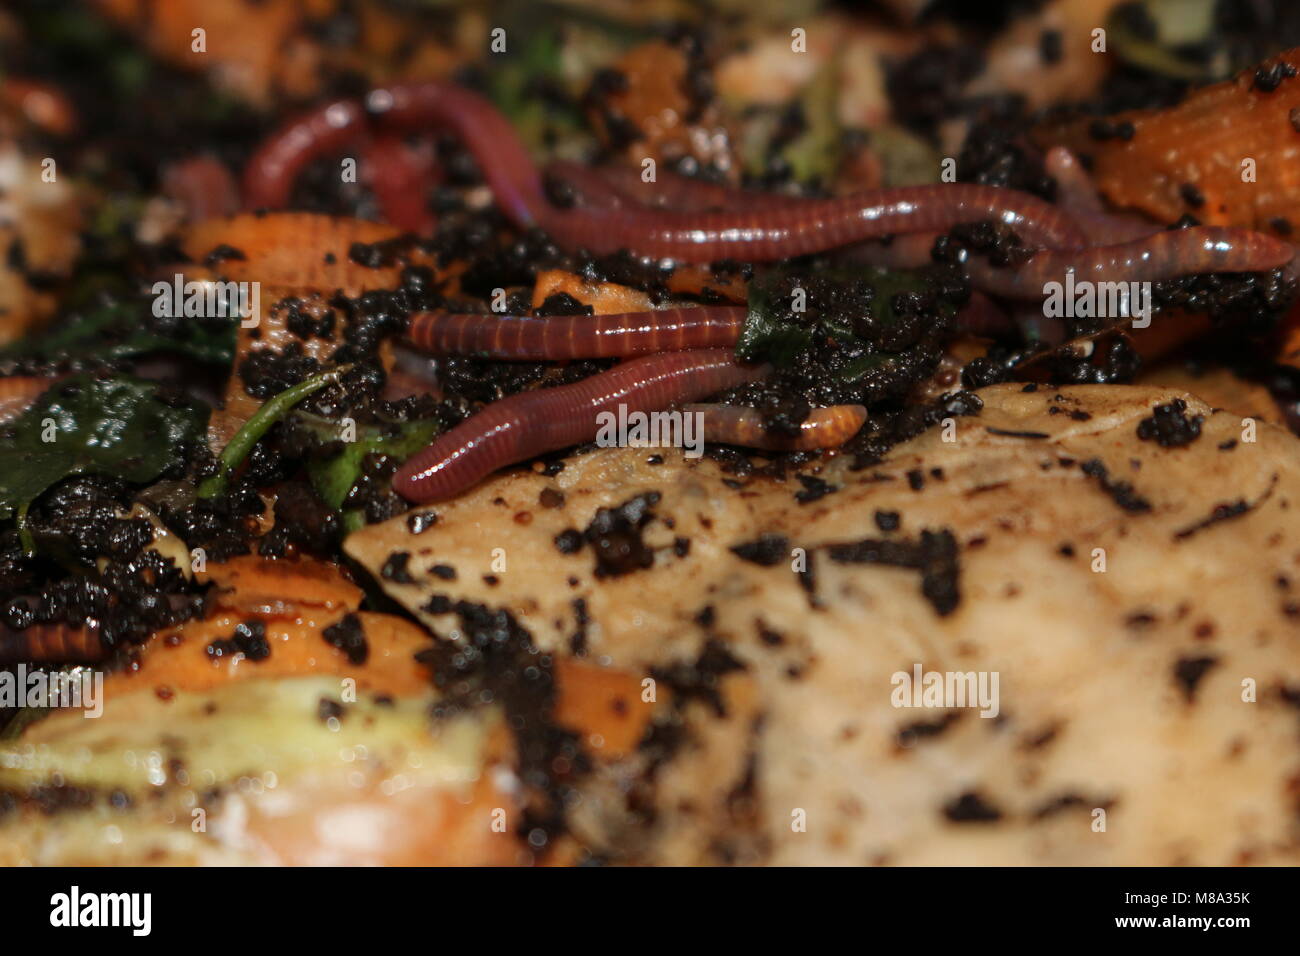 vermicomposting is a way for people with small properties to compost their food waste and produce an organic fertilizer. This photo depicts the worms eating food waste Stock Photo